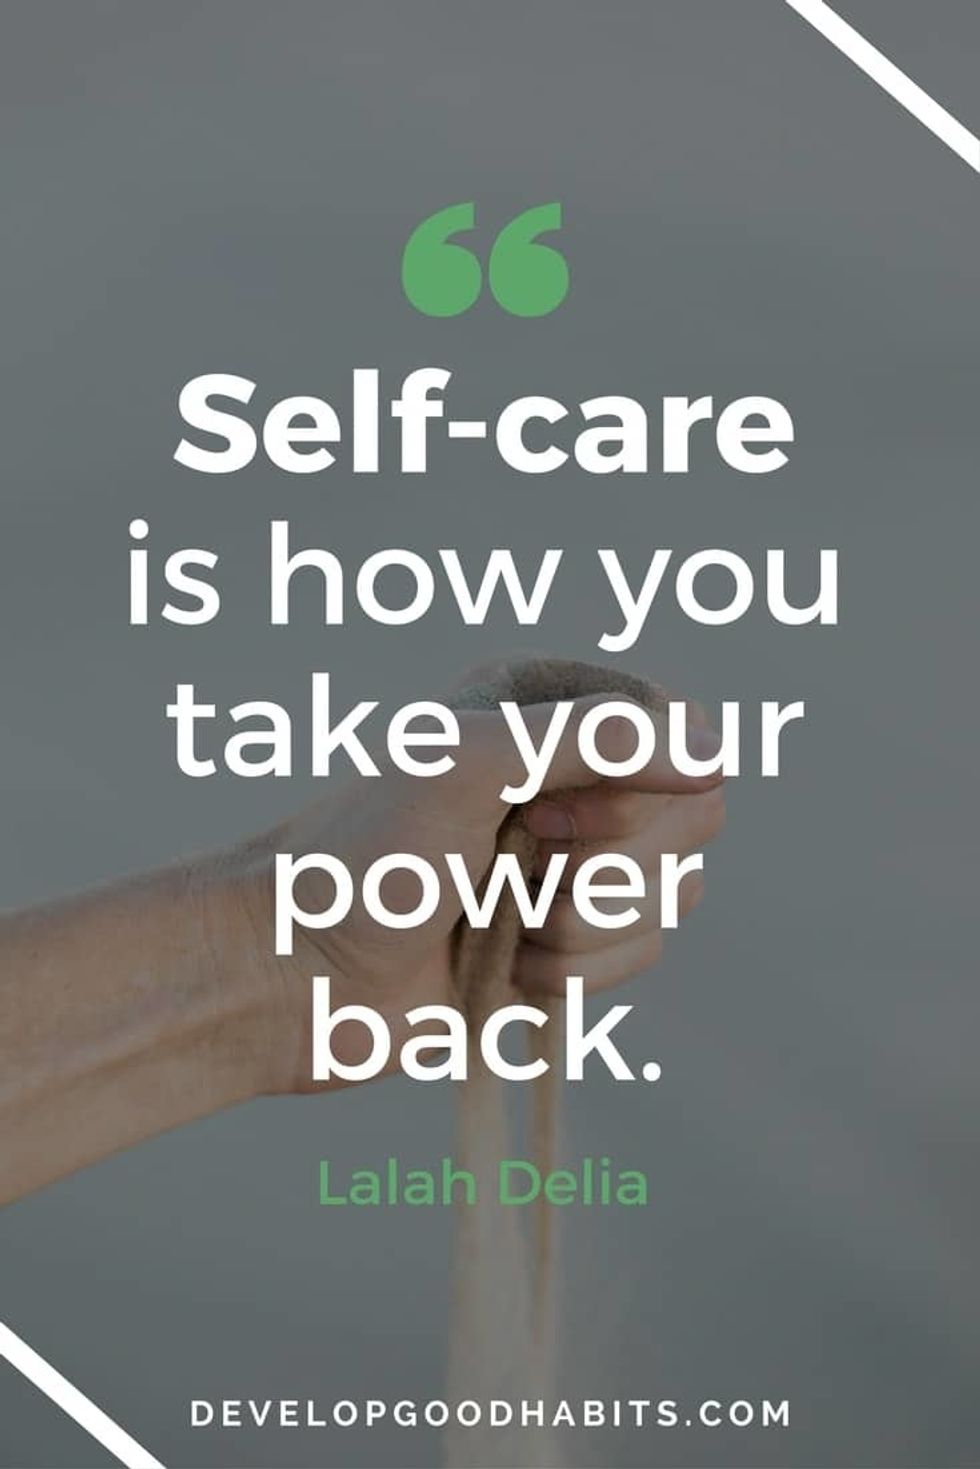 How To Practice "Self-Care" Correctly